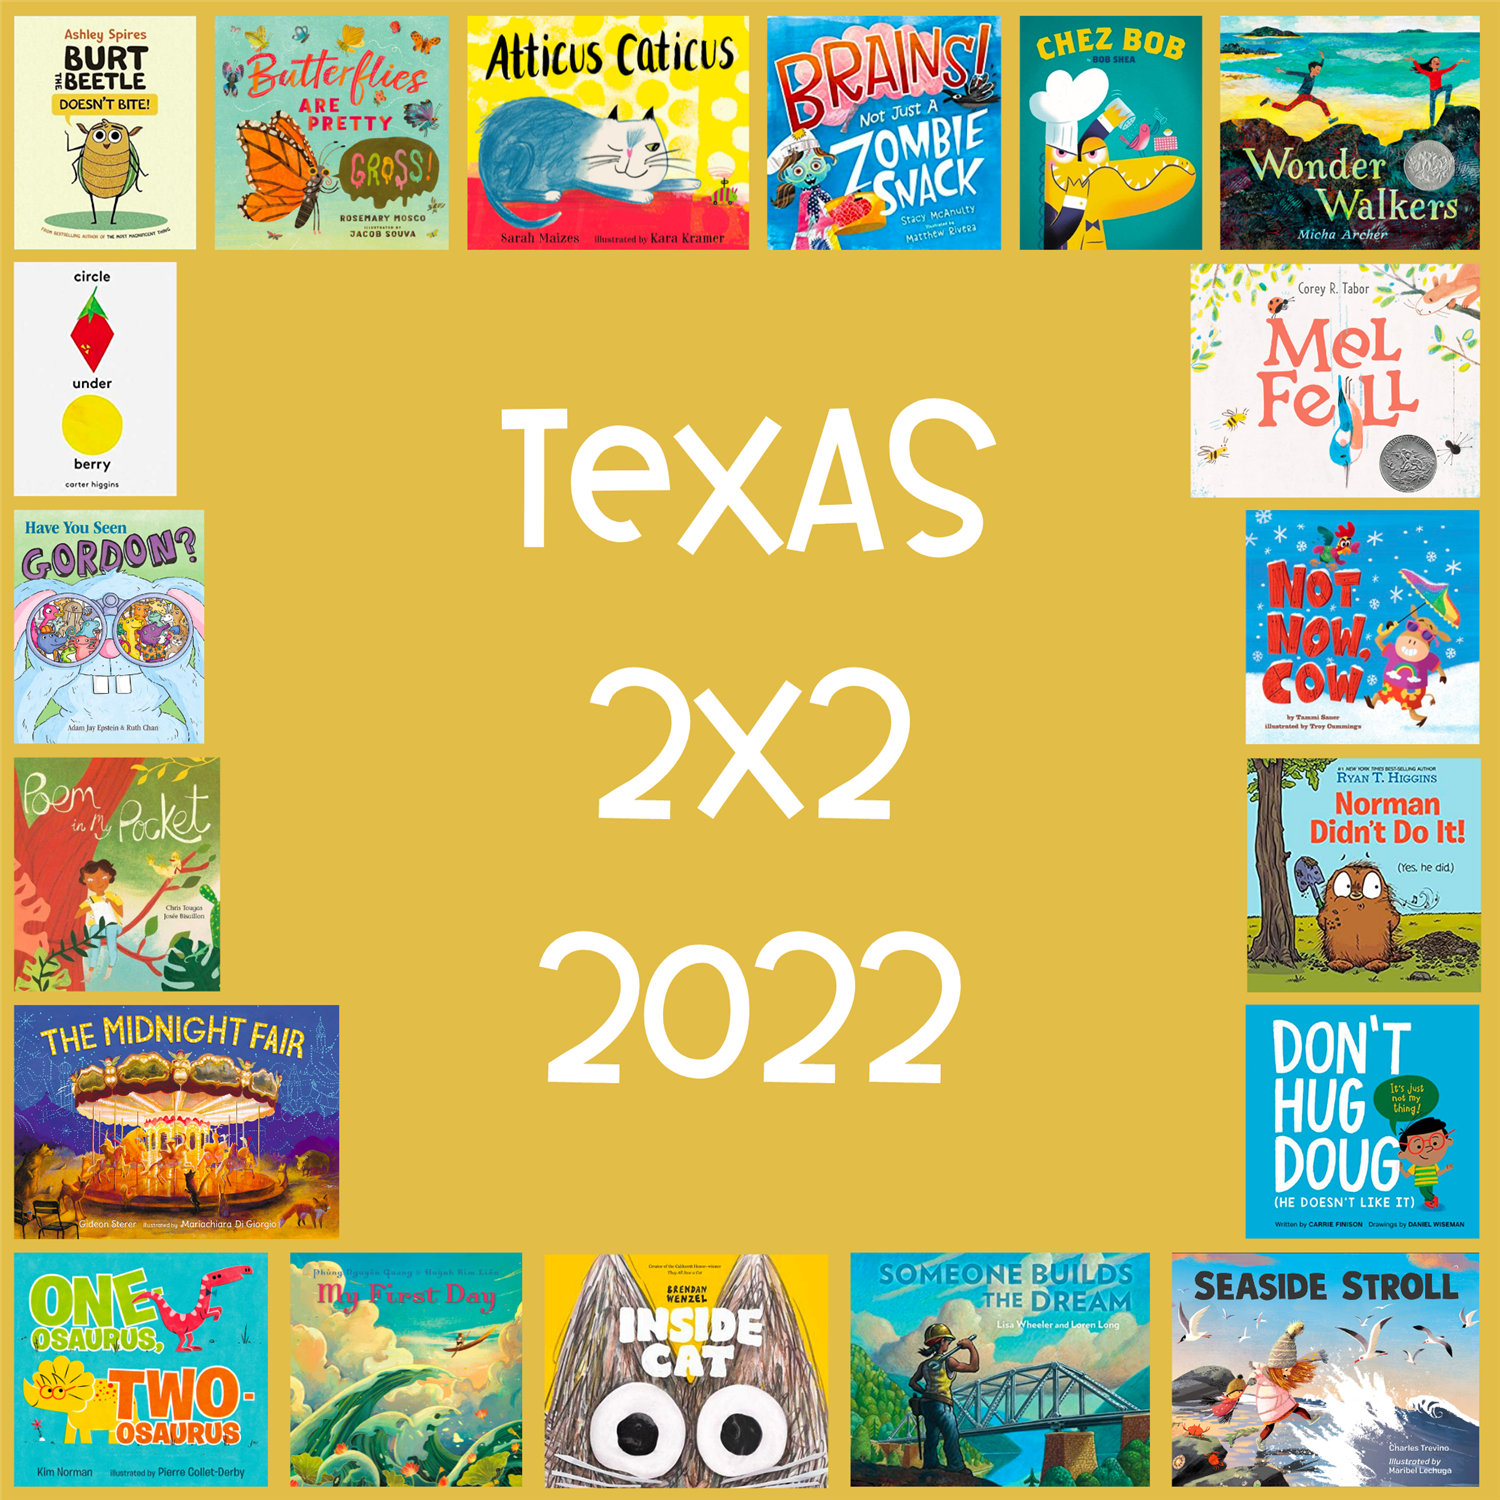 Texas 2X2 2022 covers